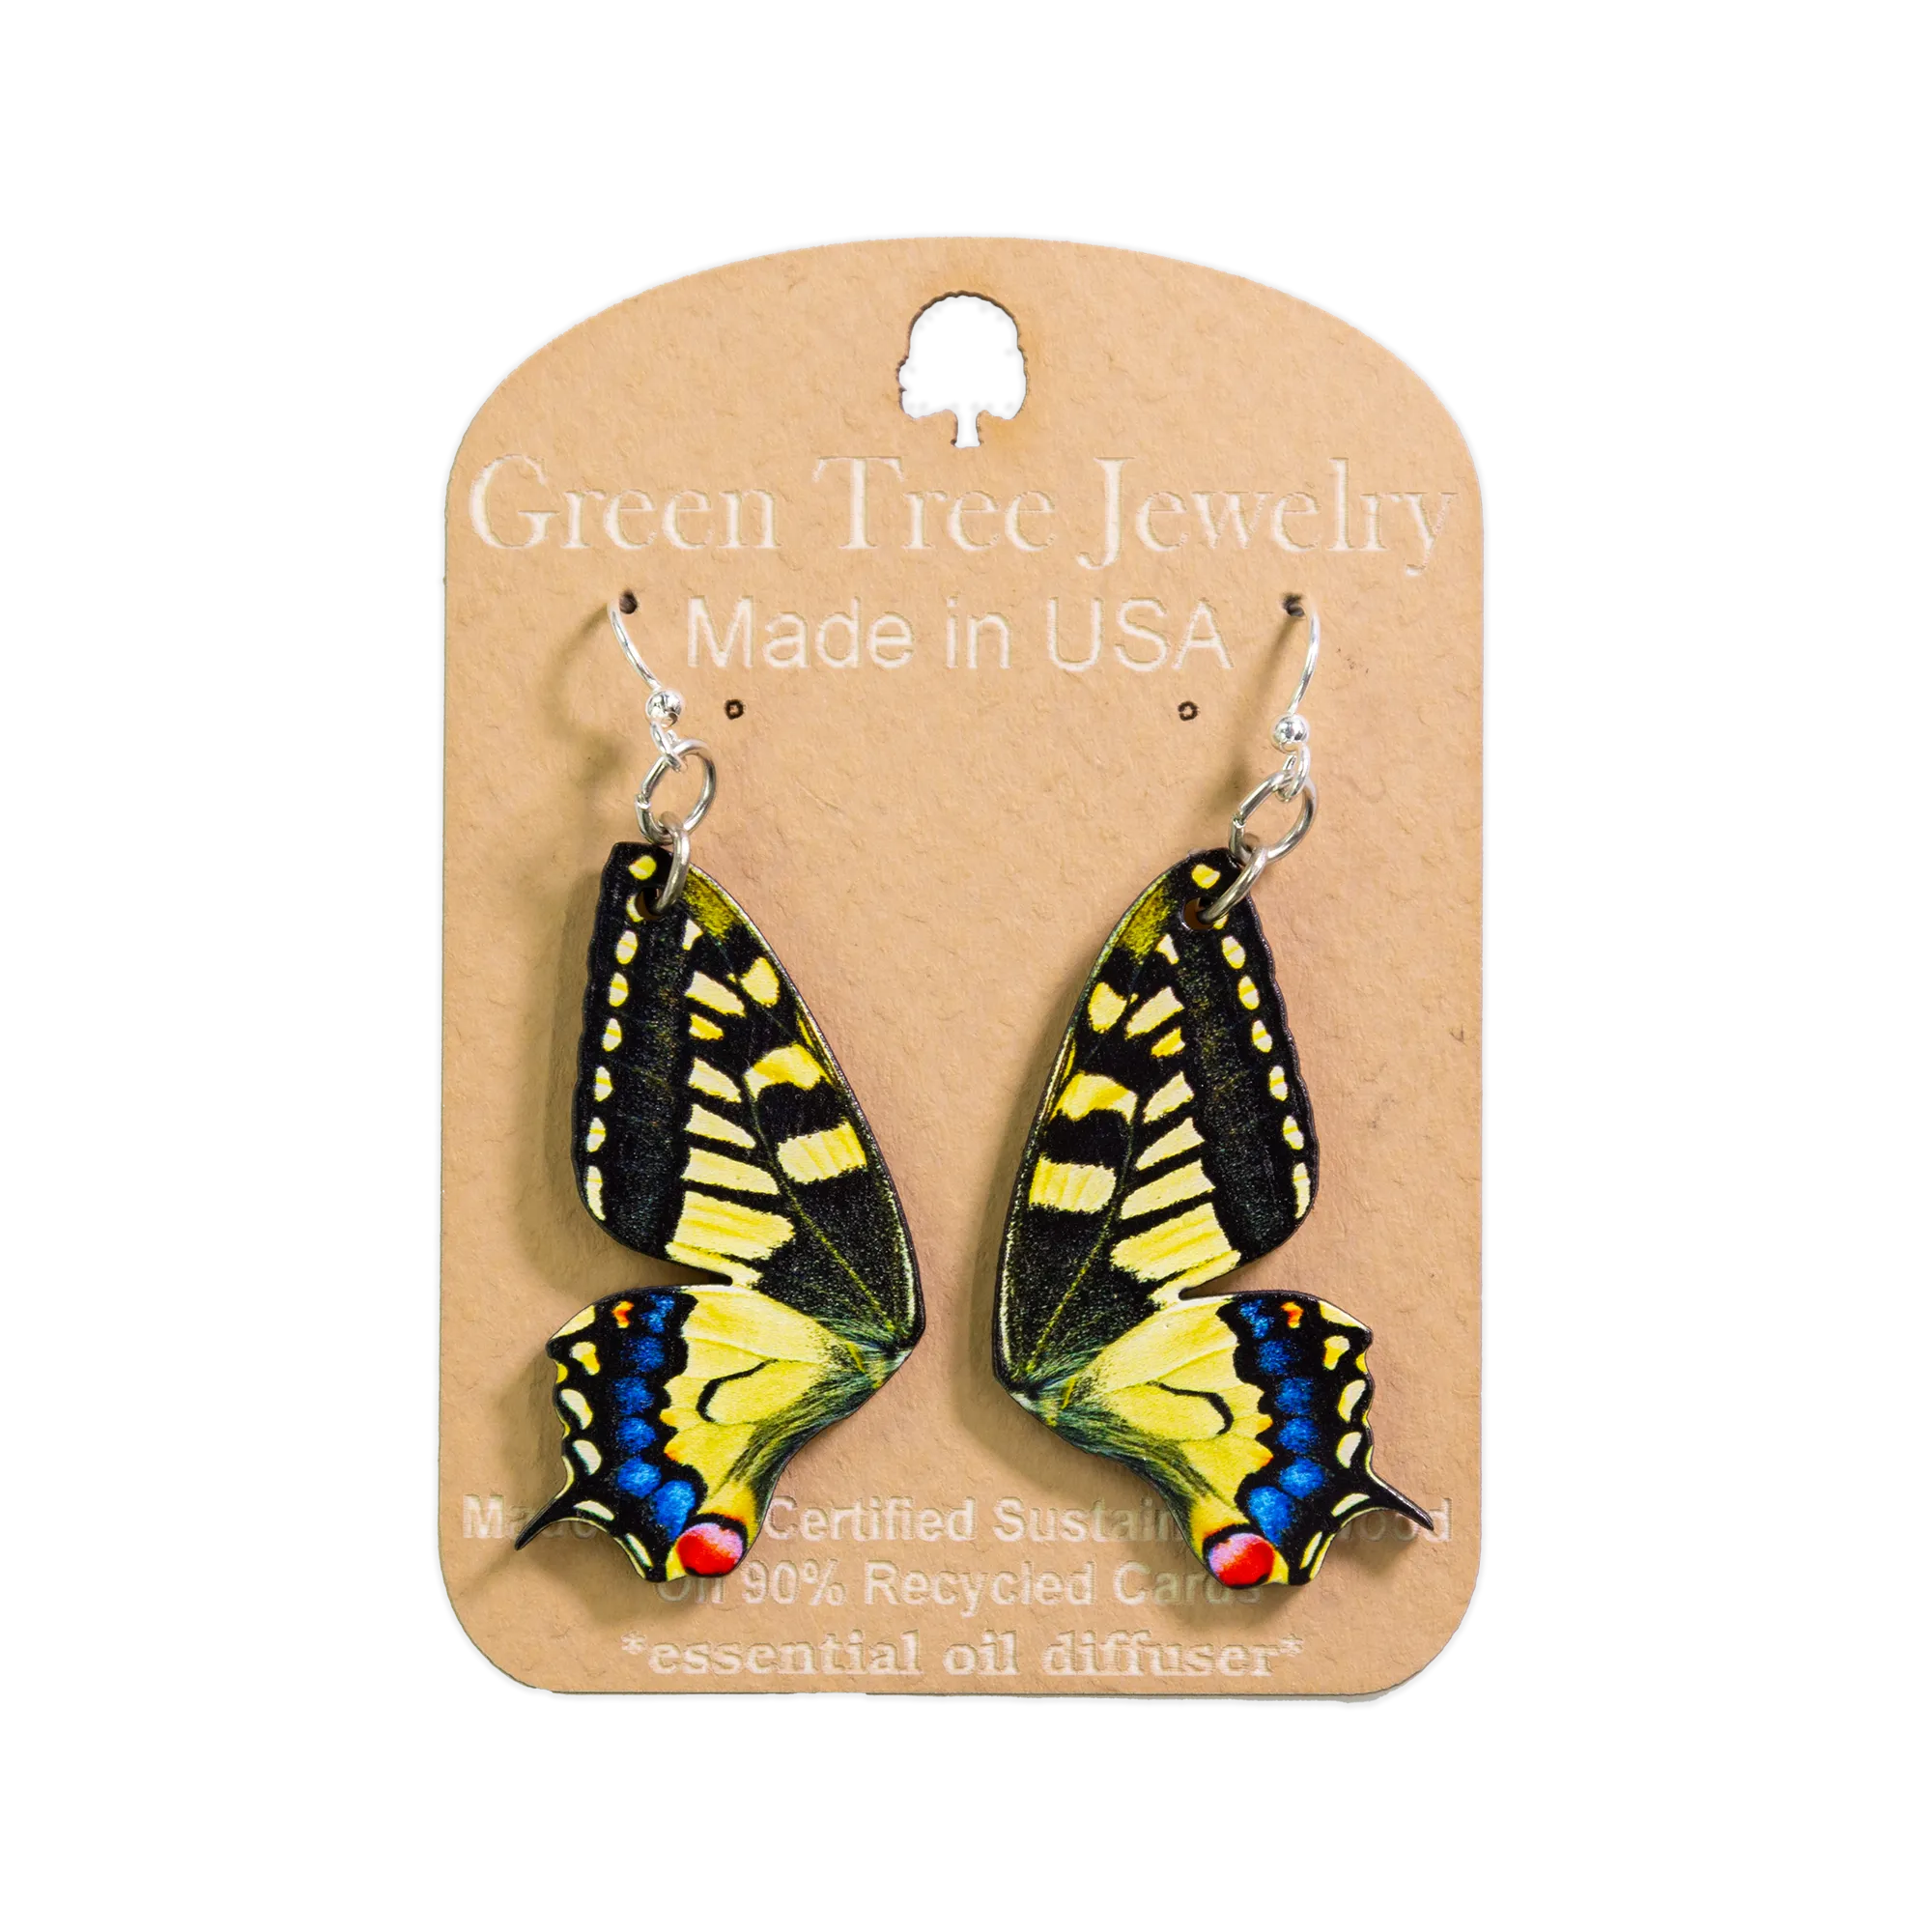 Visit the Swallowtail Butterfly Earrings Product Page